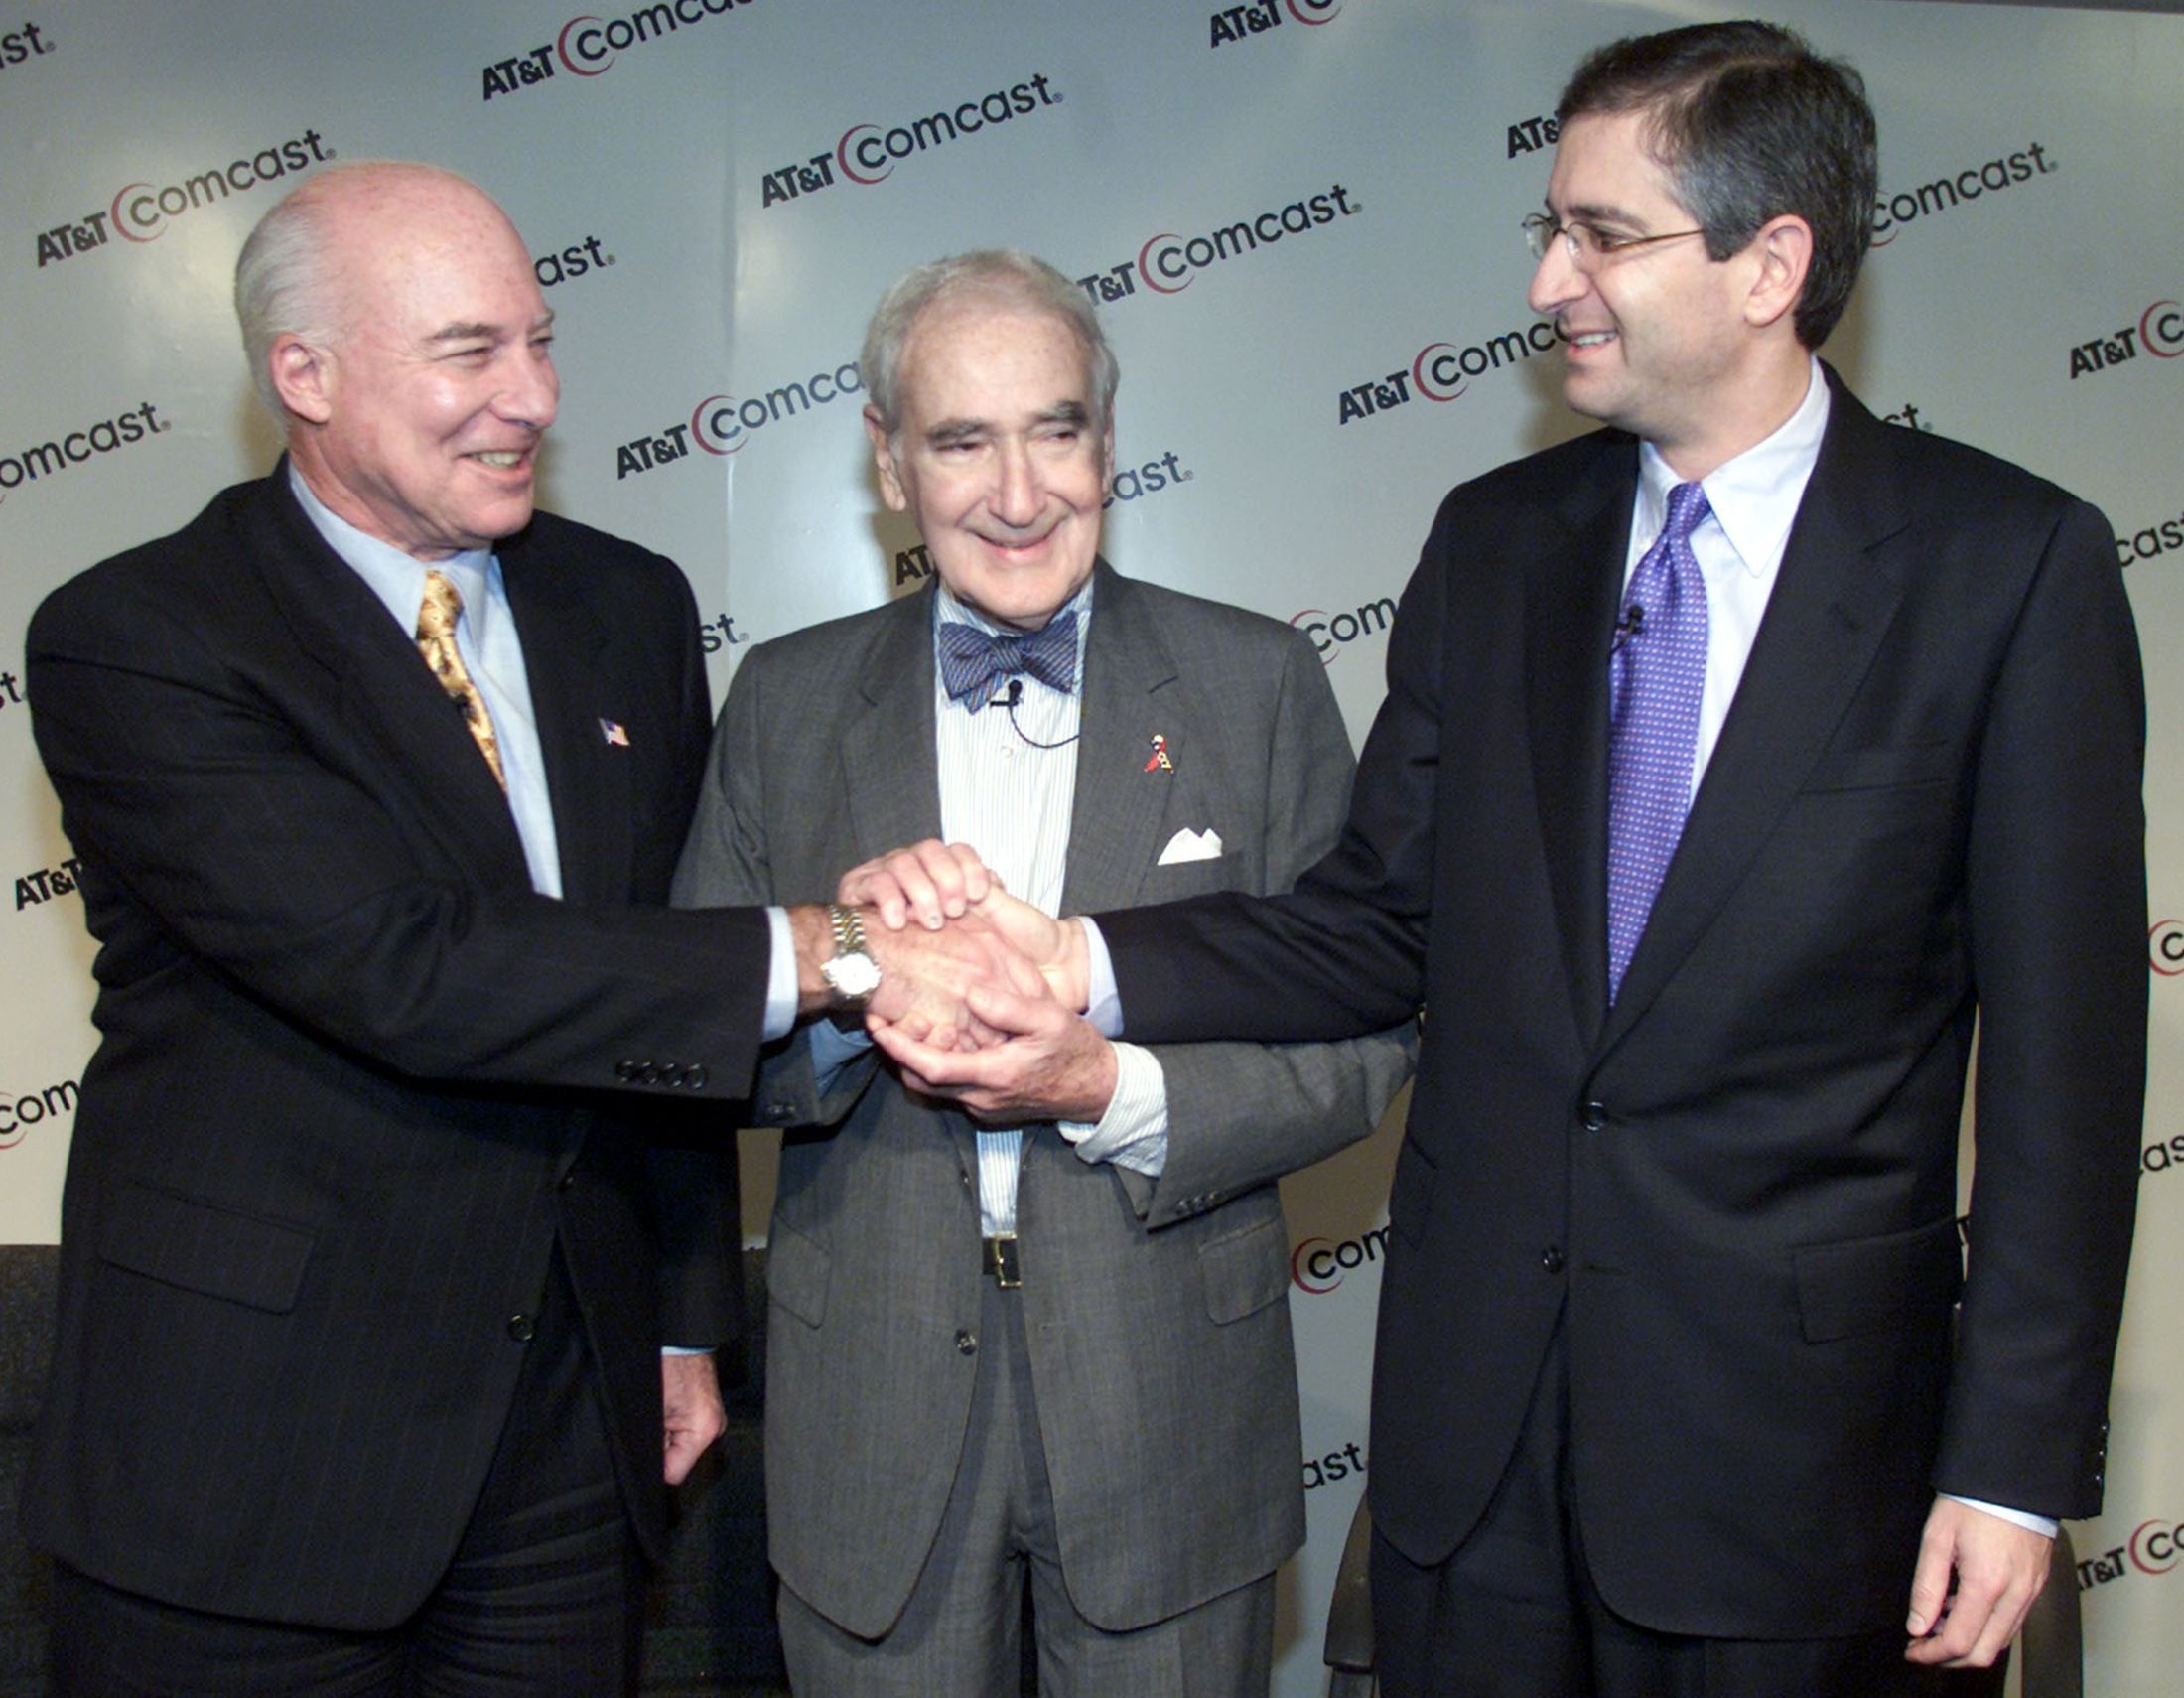 Ralph J. Roberts, Comcast founder, is dead at 95